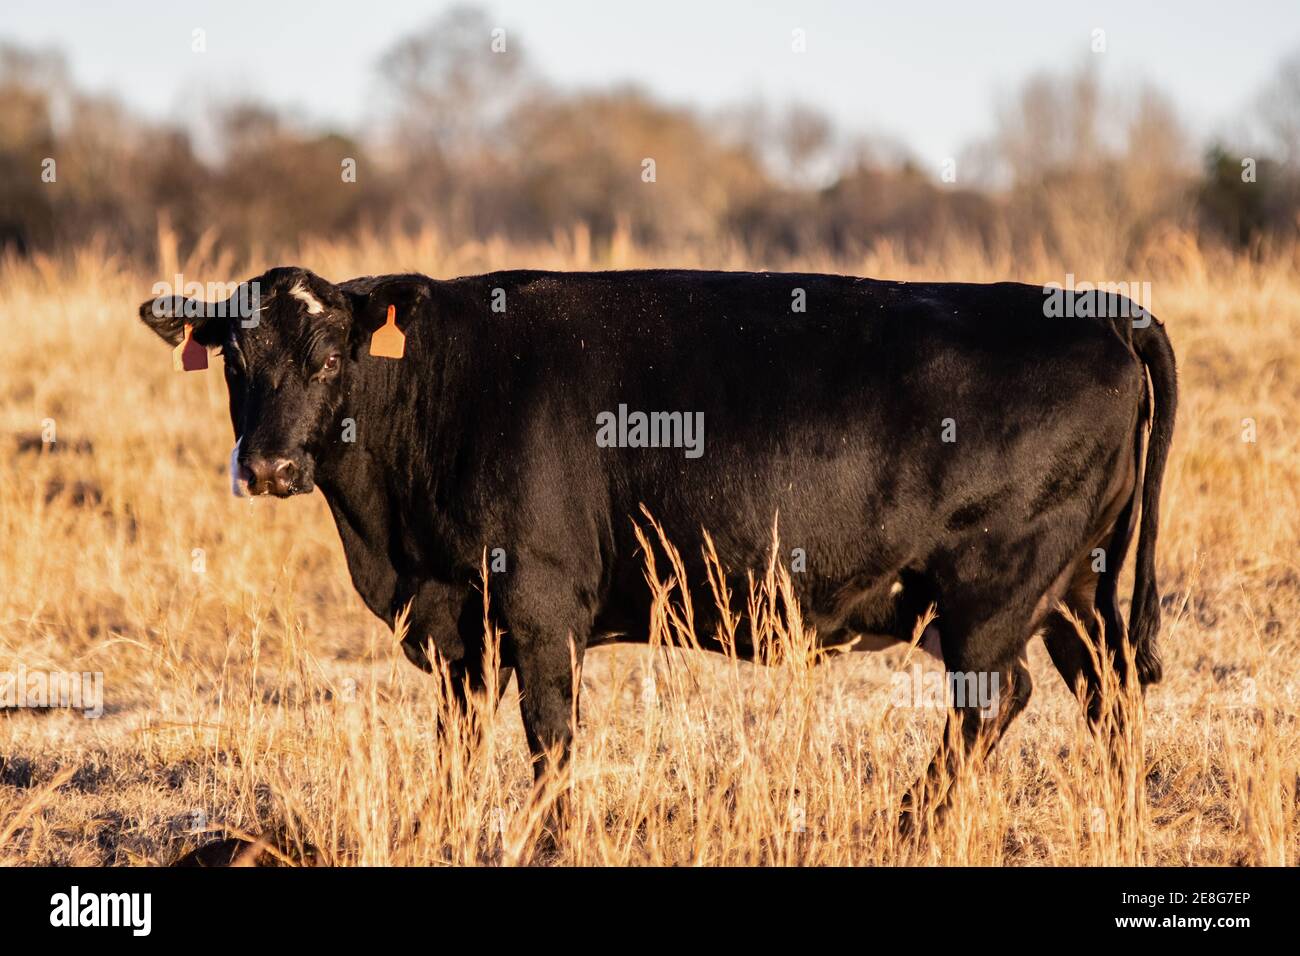 Black Angus crossbred beef cow standing in a dormant brown pasture during golden hour lighting. Stock Photo